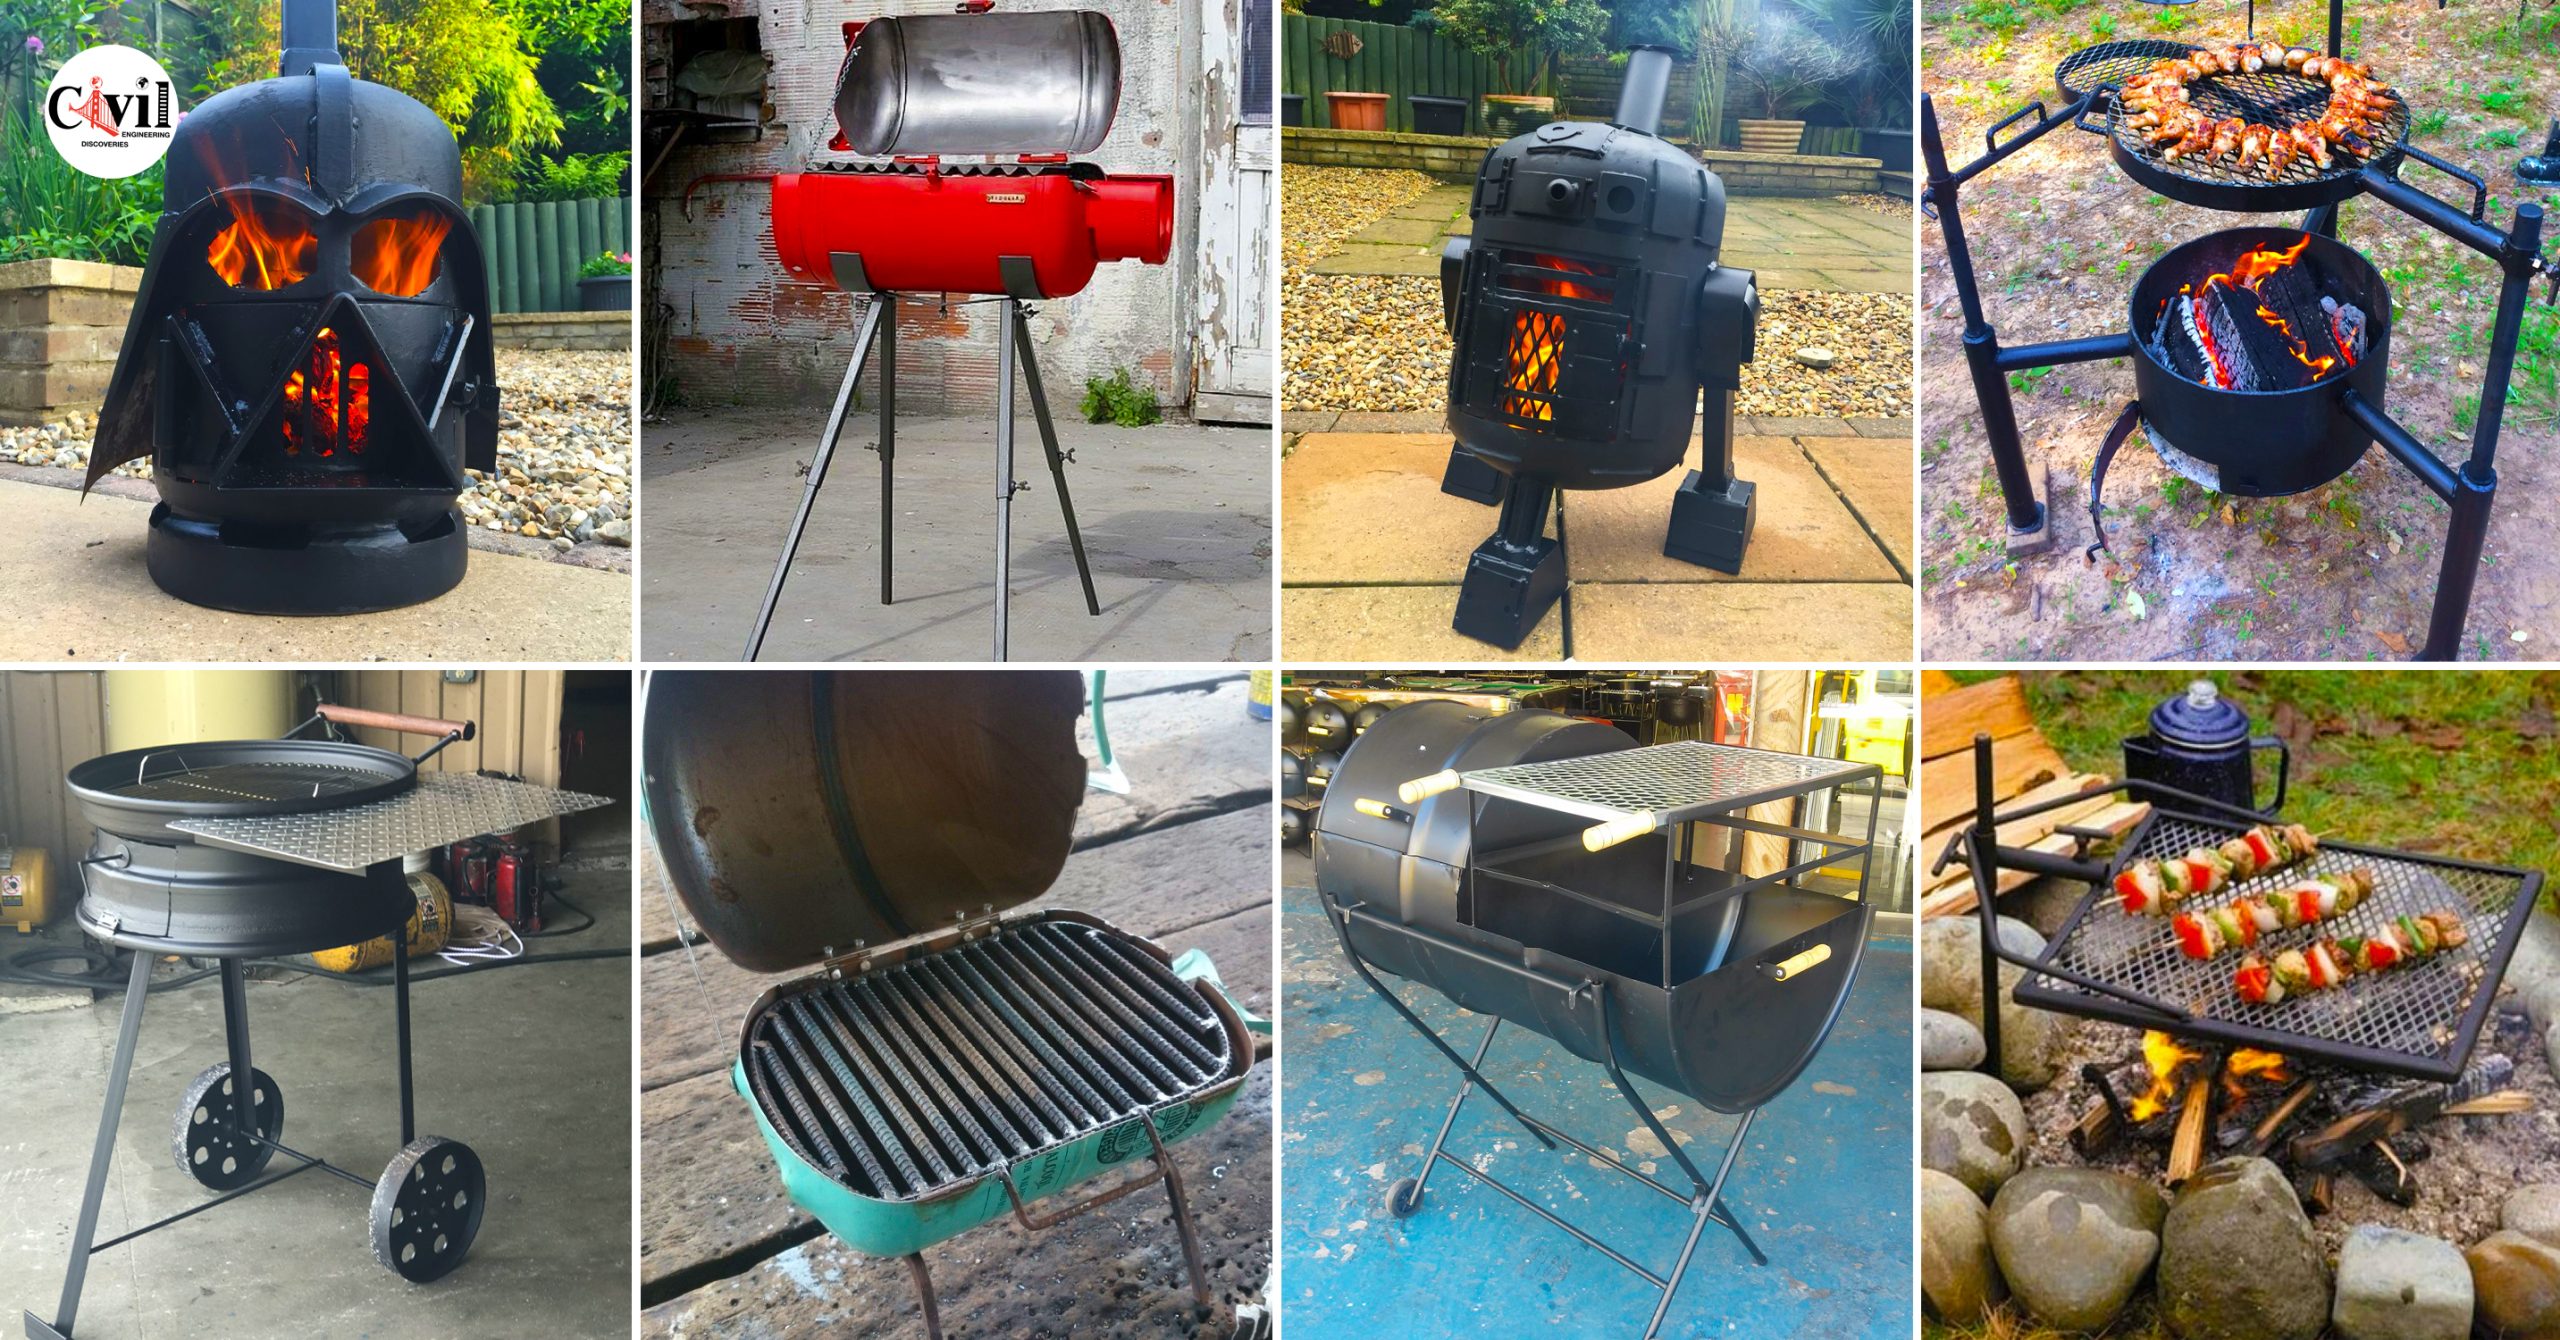 https://engineeringdiscoveries.com/wp-content/uploads/2023/08/How-To-Make-A-BBQ-Smoker-For-Your-Backyard-scaled.jpg